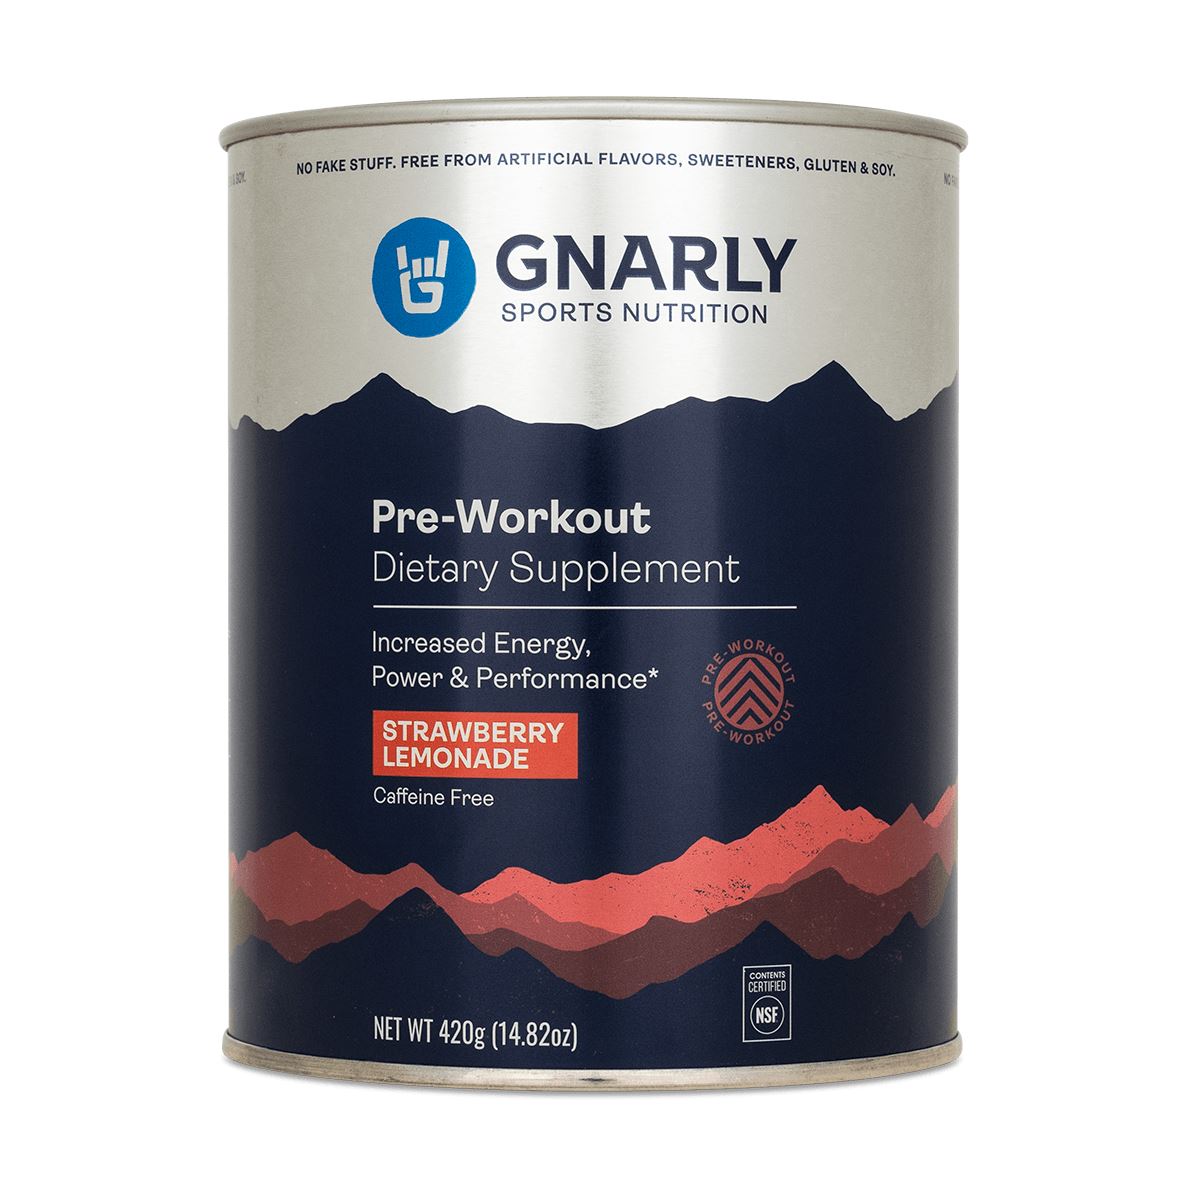 Gnarly Pre-Workout by Gnarly Nutrition